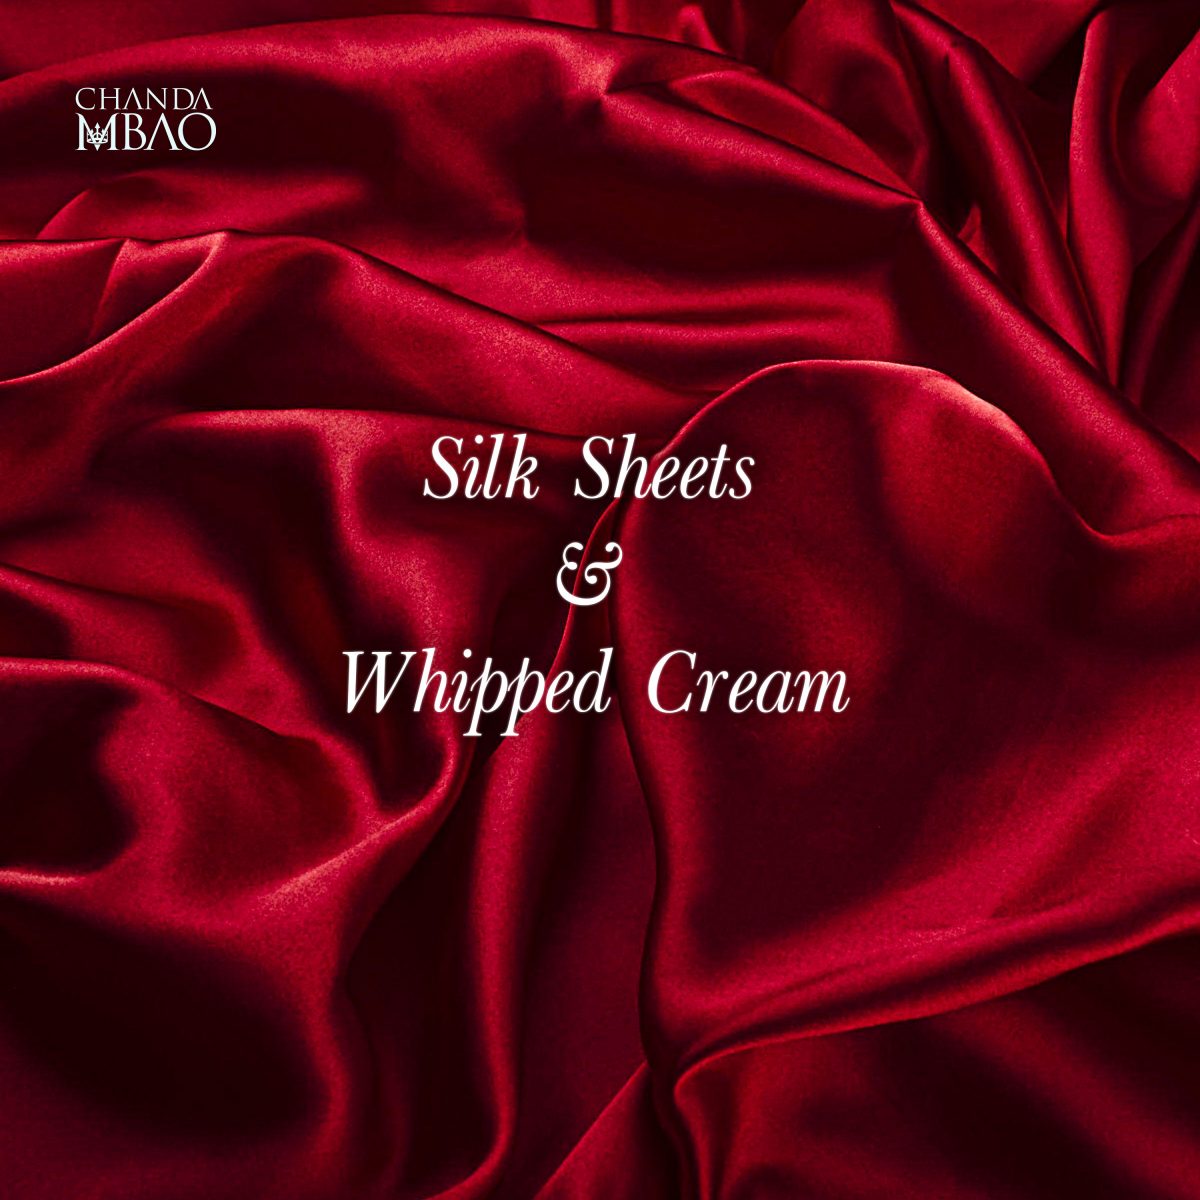 Chanda Mbao unveils Track-list for 'Silk Sheets & Whipped Cream' EP